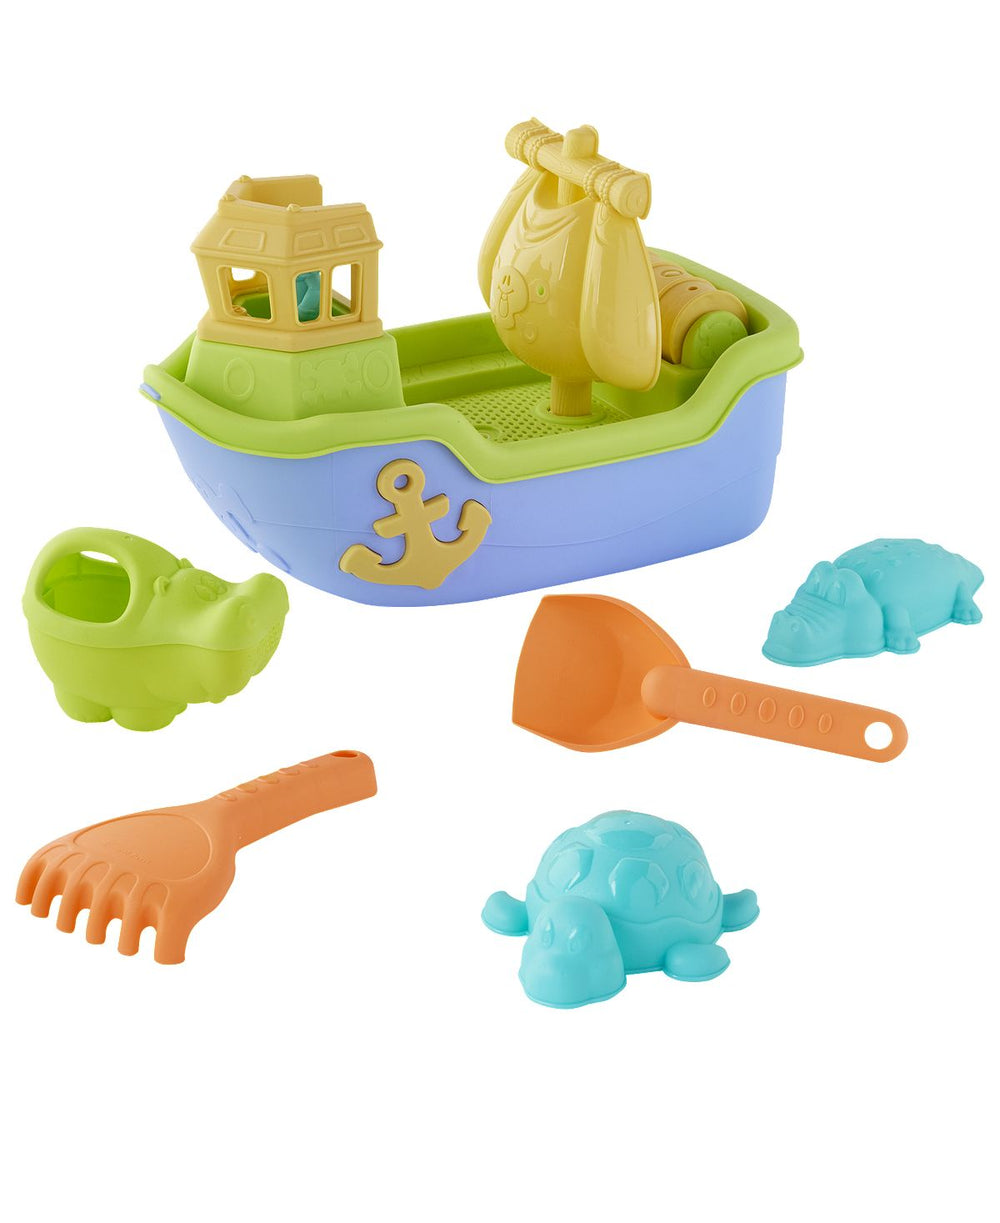 Toys R Us - Sizzlin Cool Boat Sand Toys Set - Beach Adventure Series